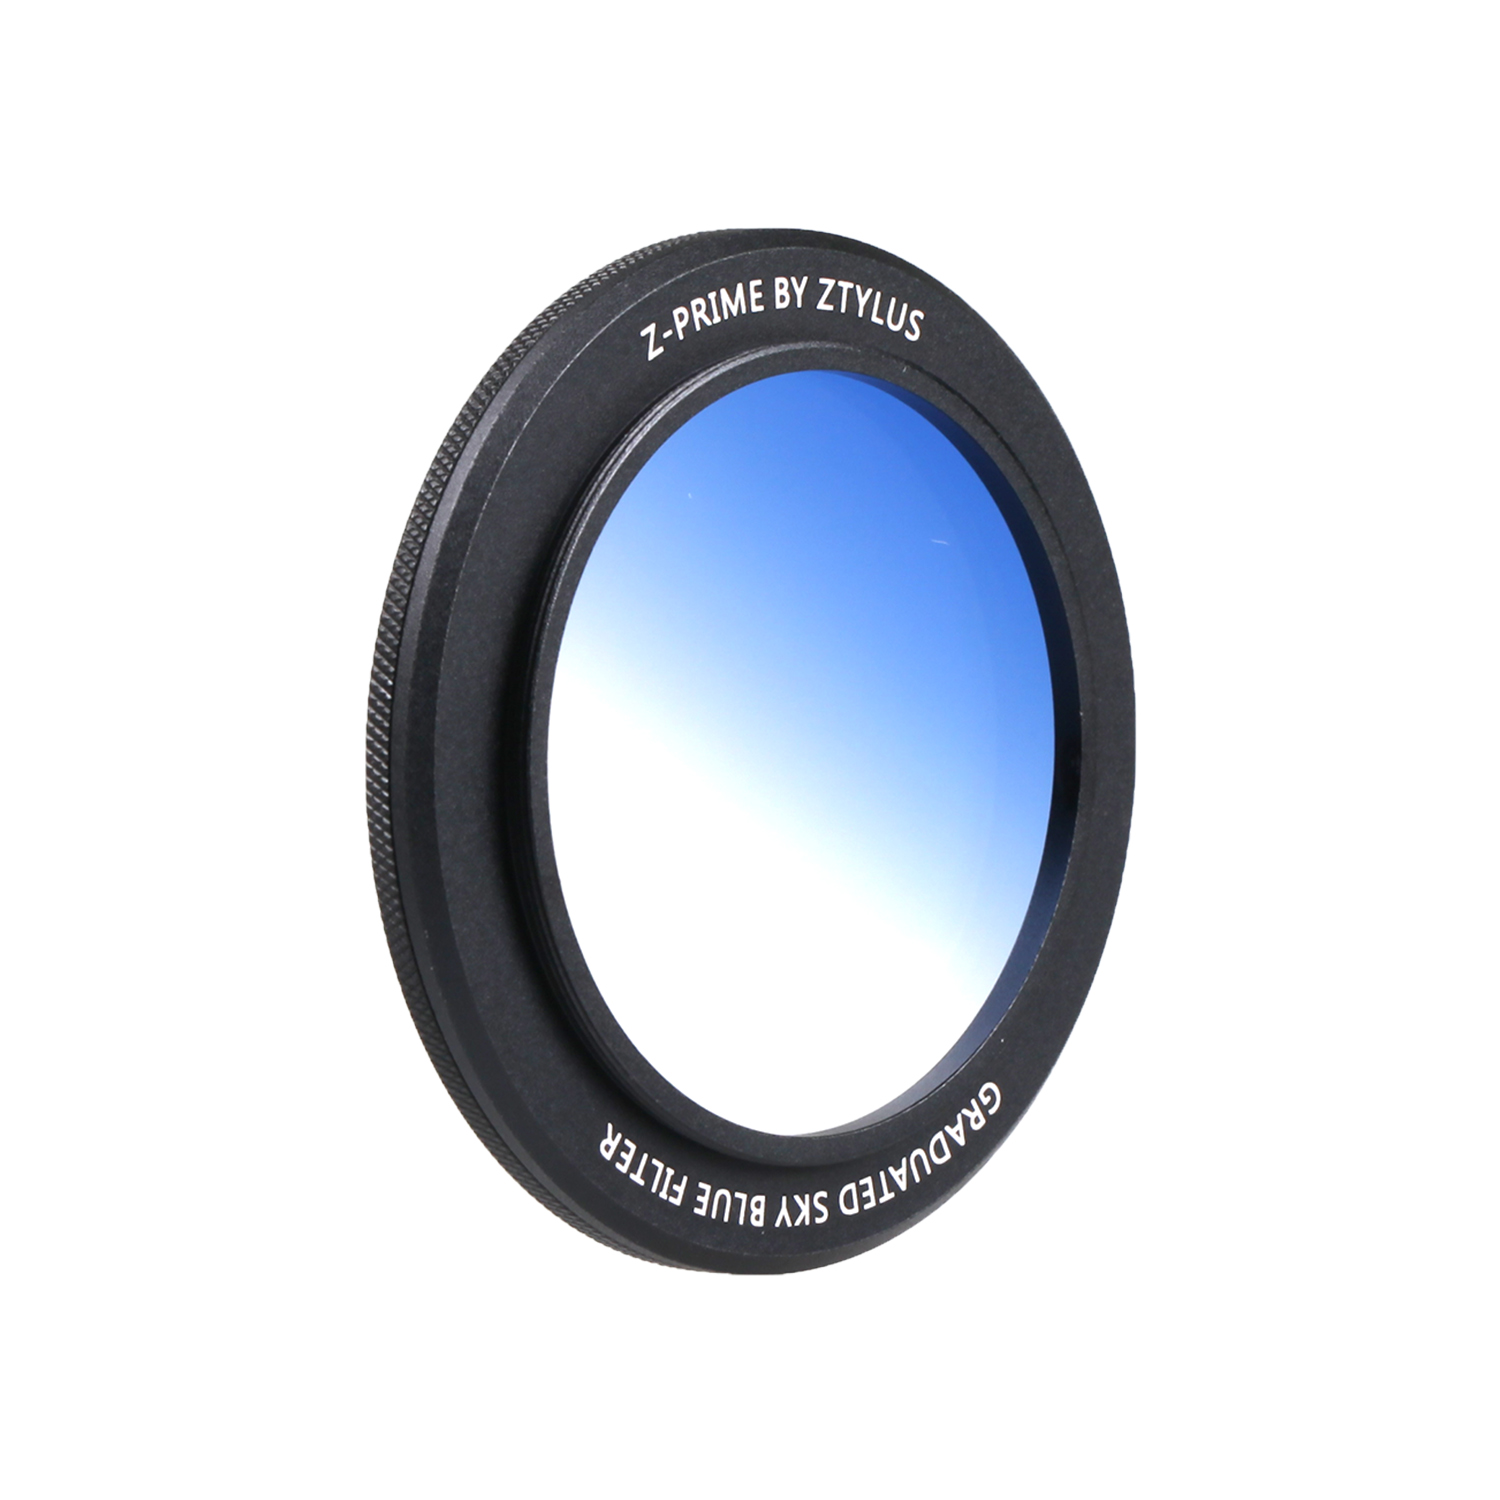 Ztylus Z-prime 4 in 1 filter for Z-prime Universal Wide Angle and Telephoto Lens only